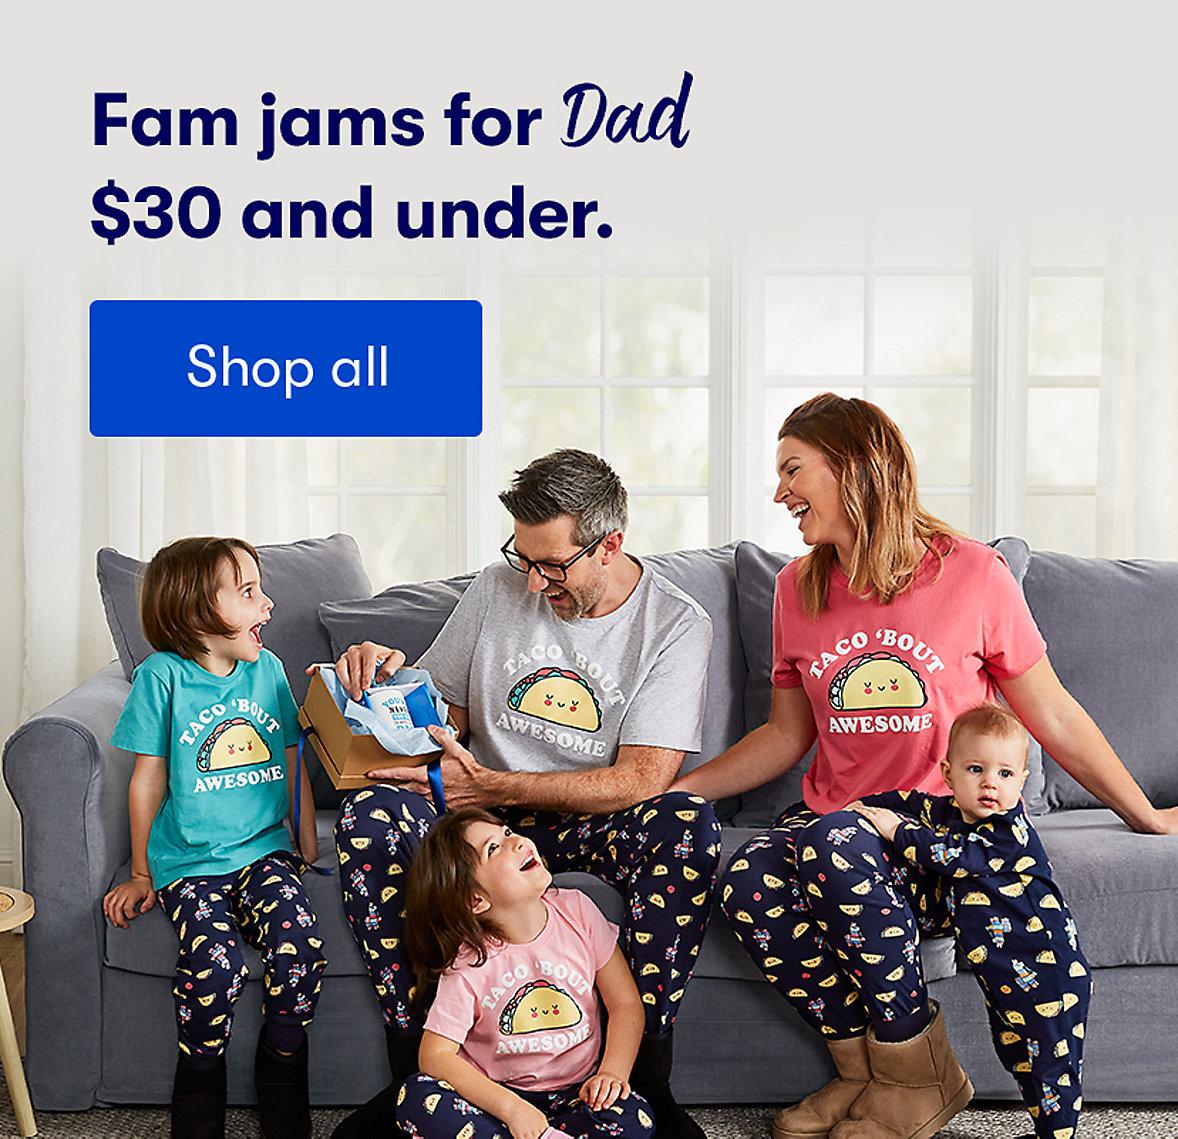 Fathers Day Fam Jams Sub Banner Mob